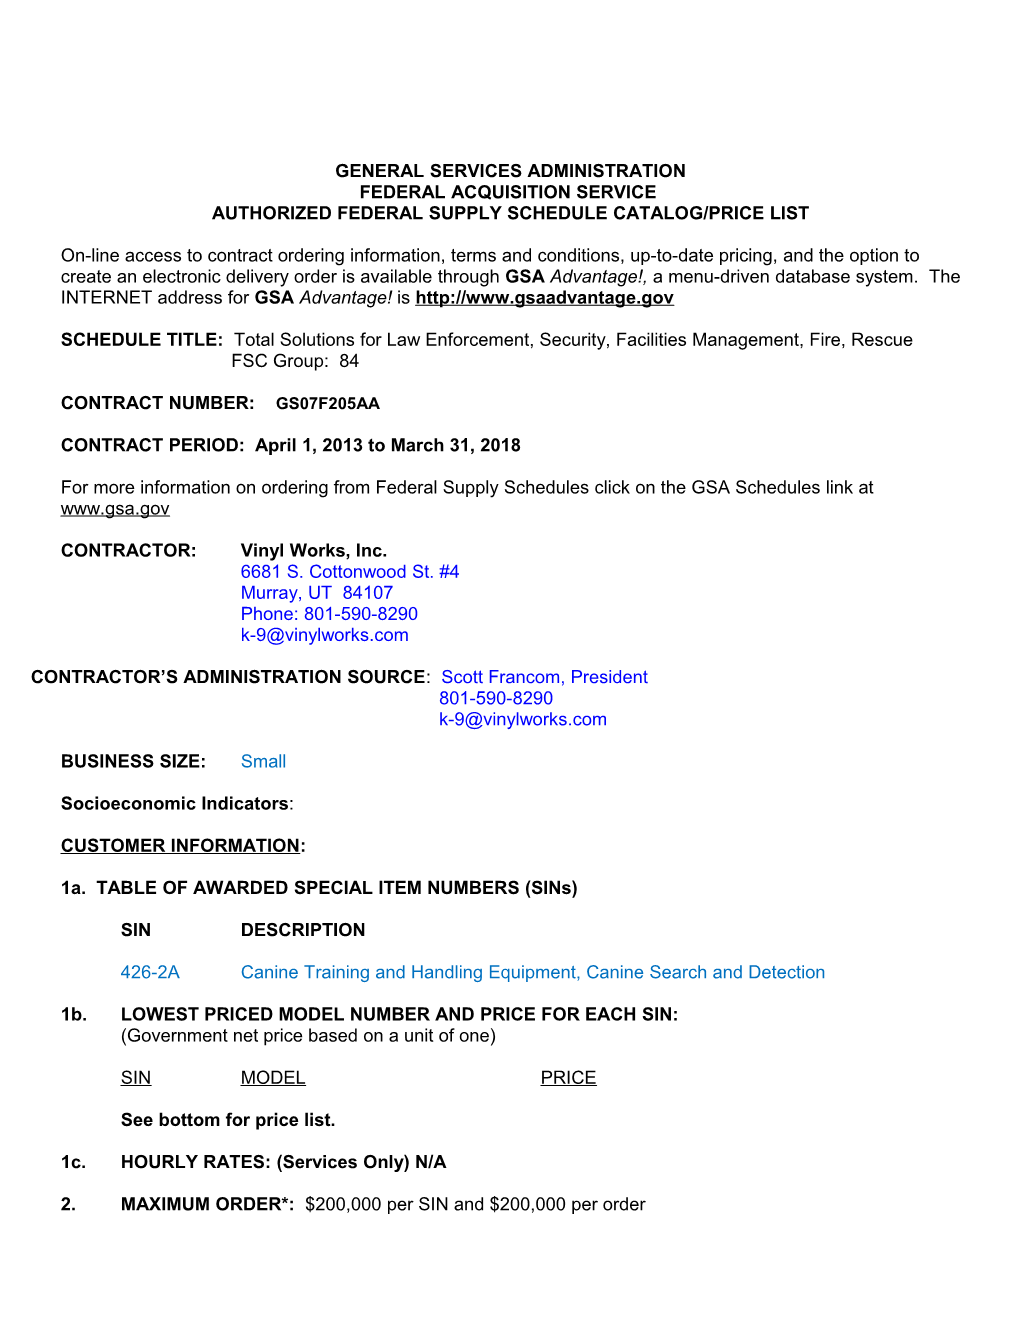 Standard Form 1449, Contract for Commercial Items (Cont D) Page 1A s6